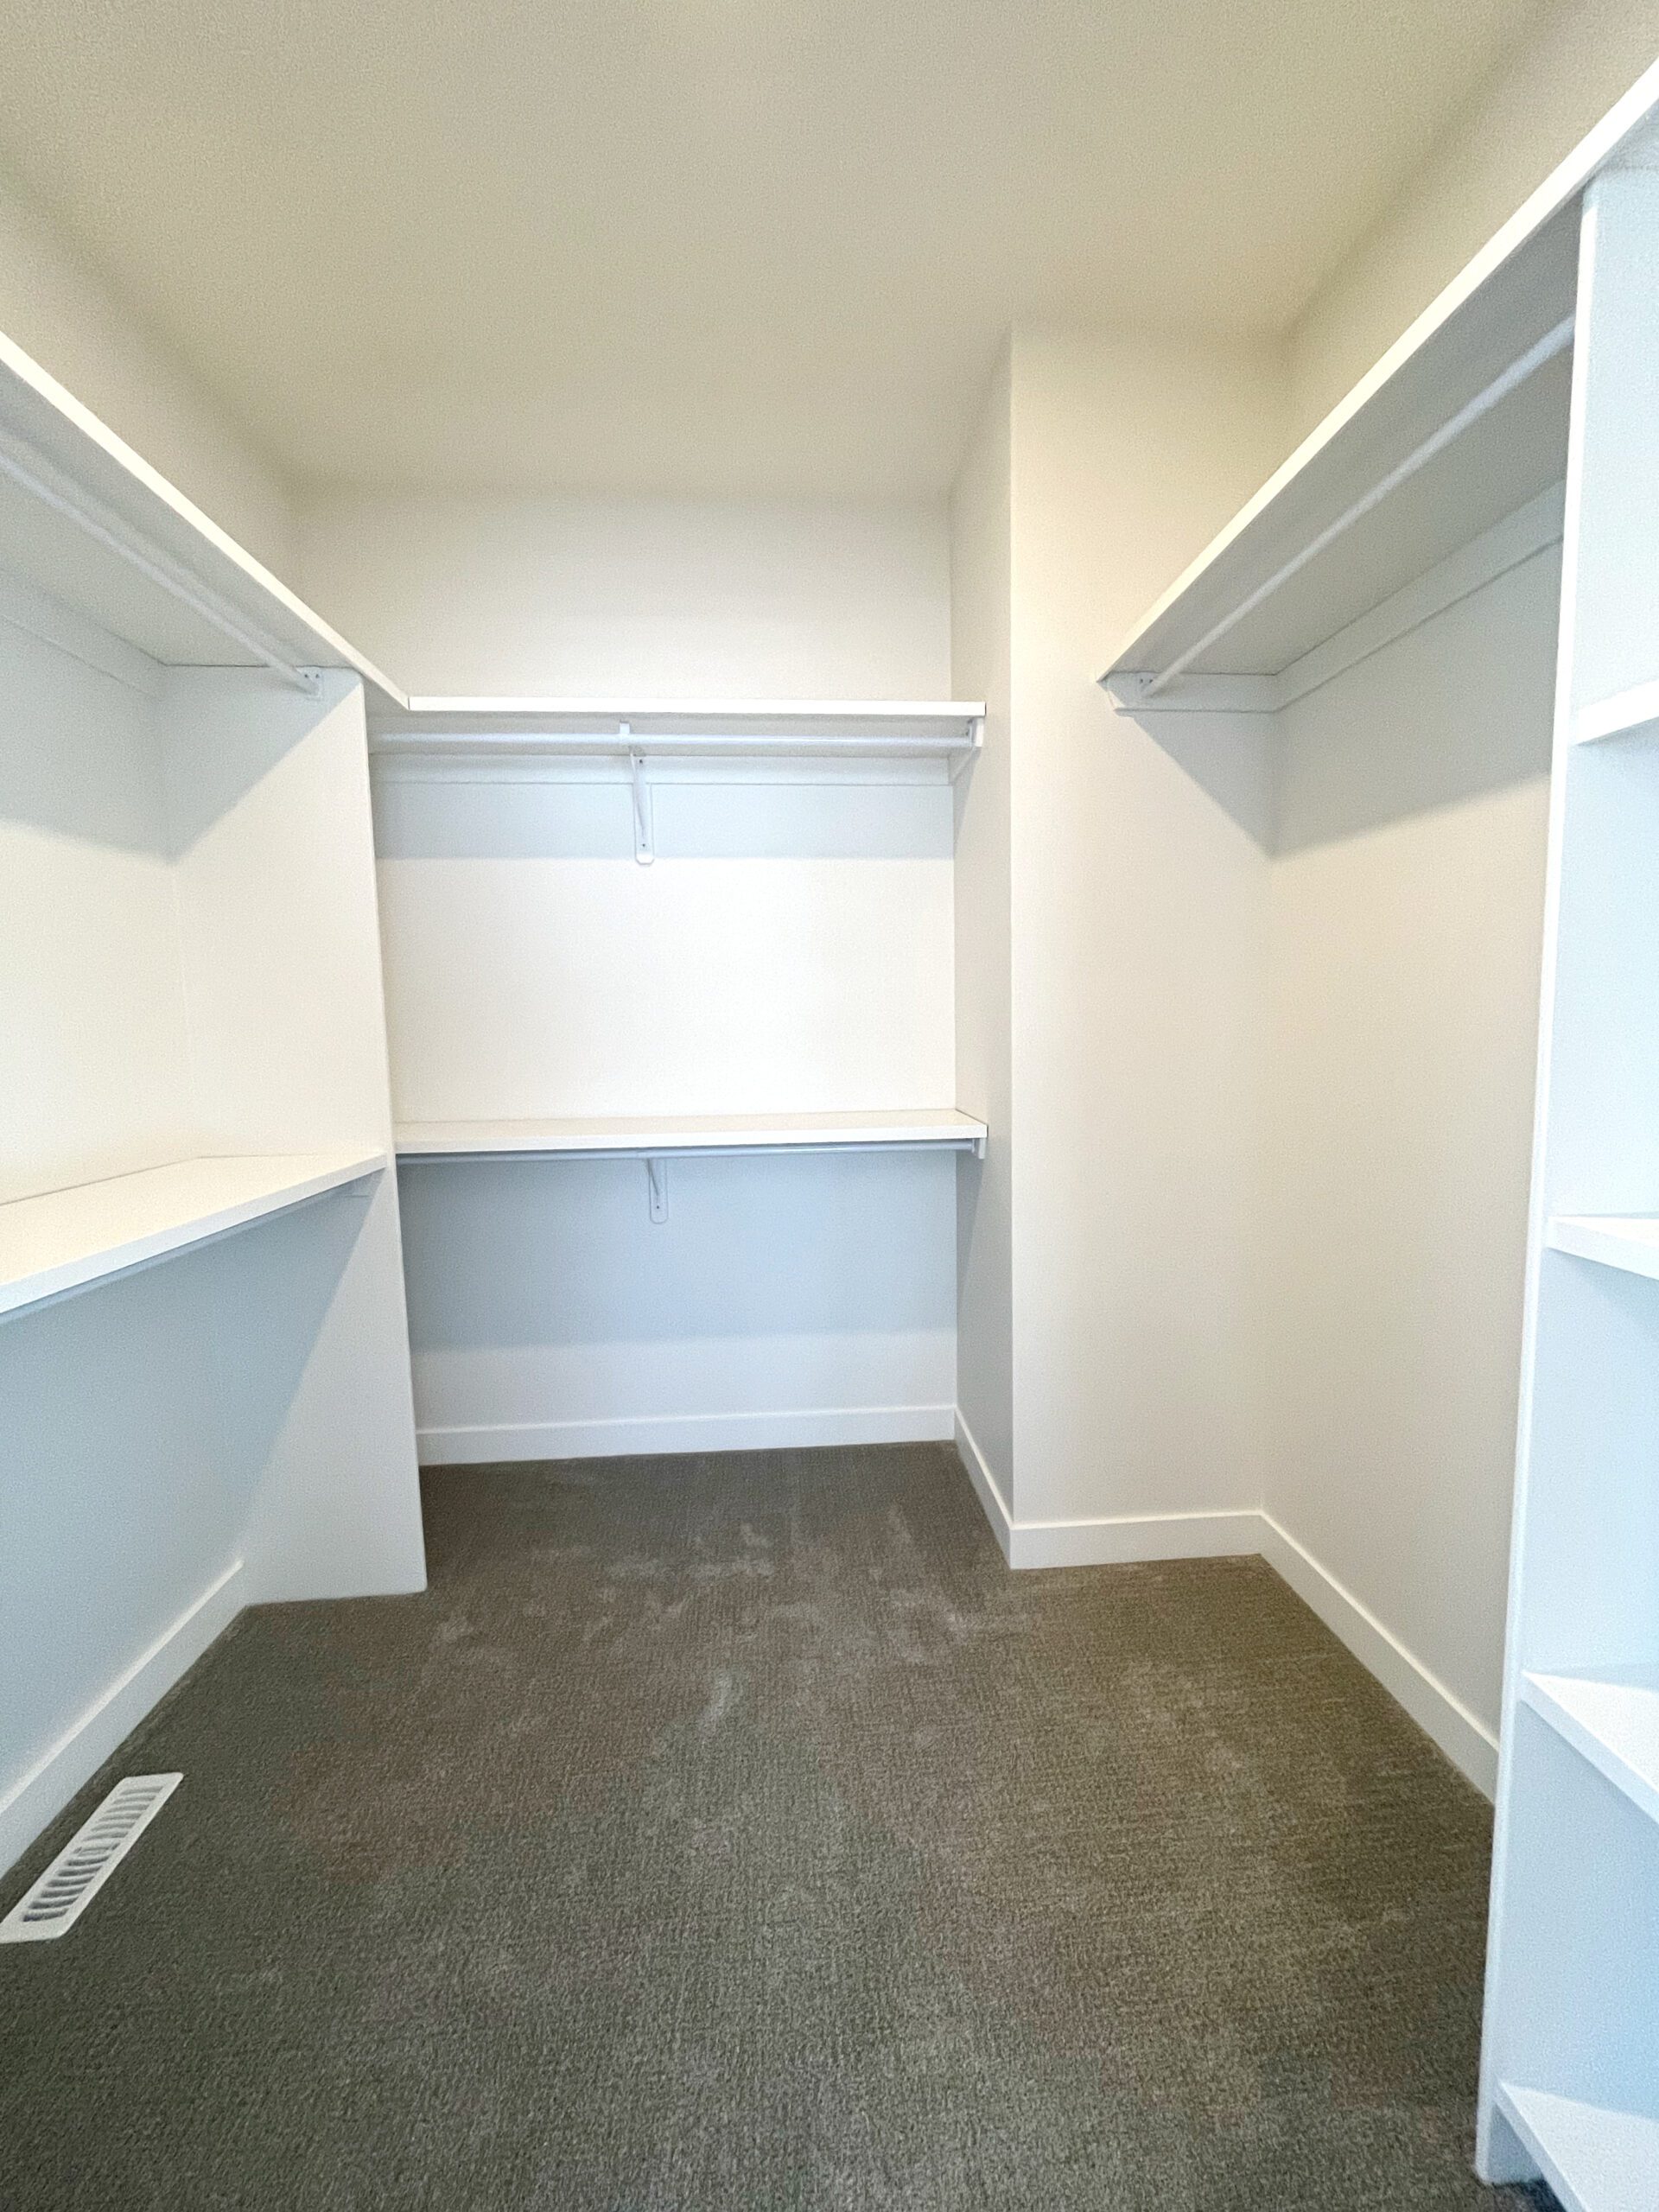 An empty walk in closet with shelves and shelves.